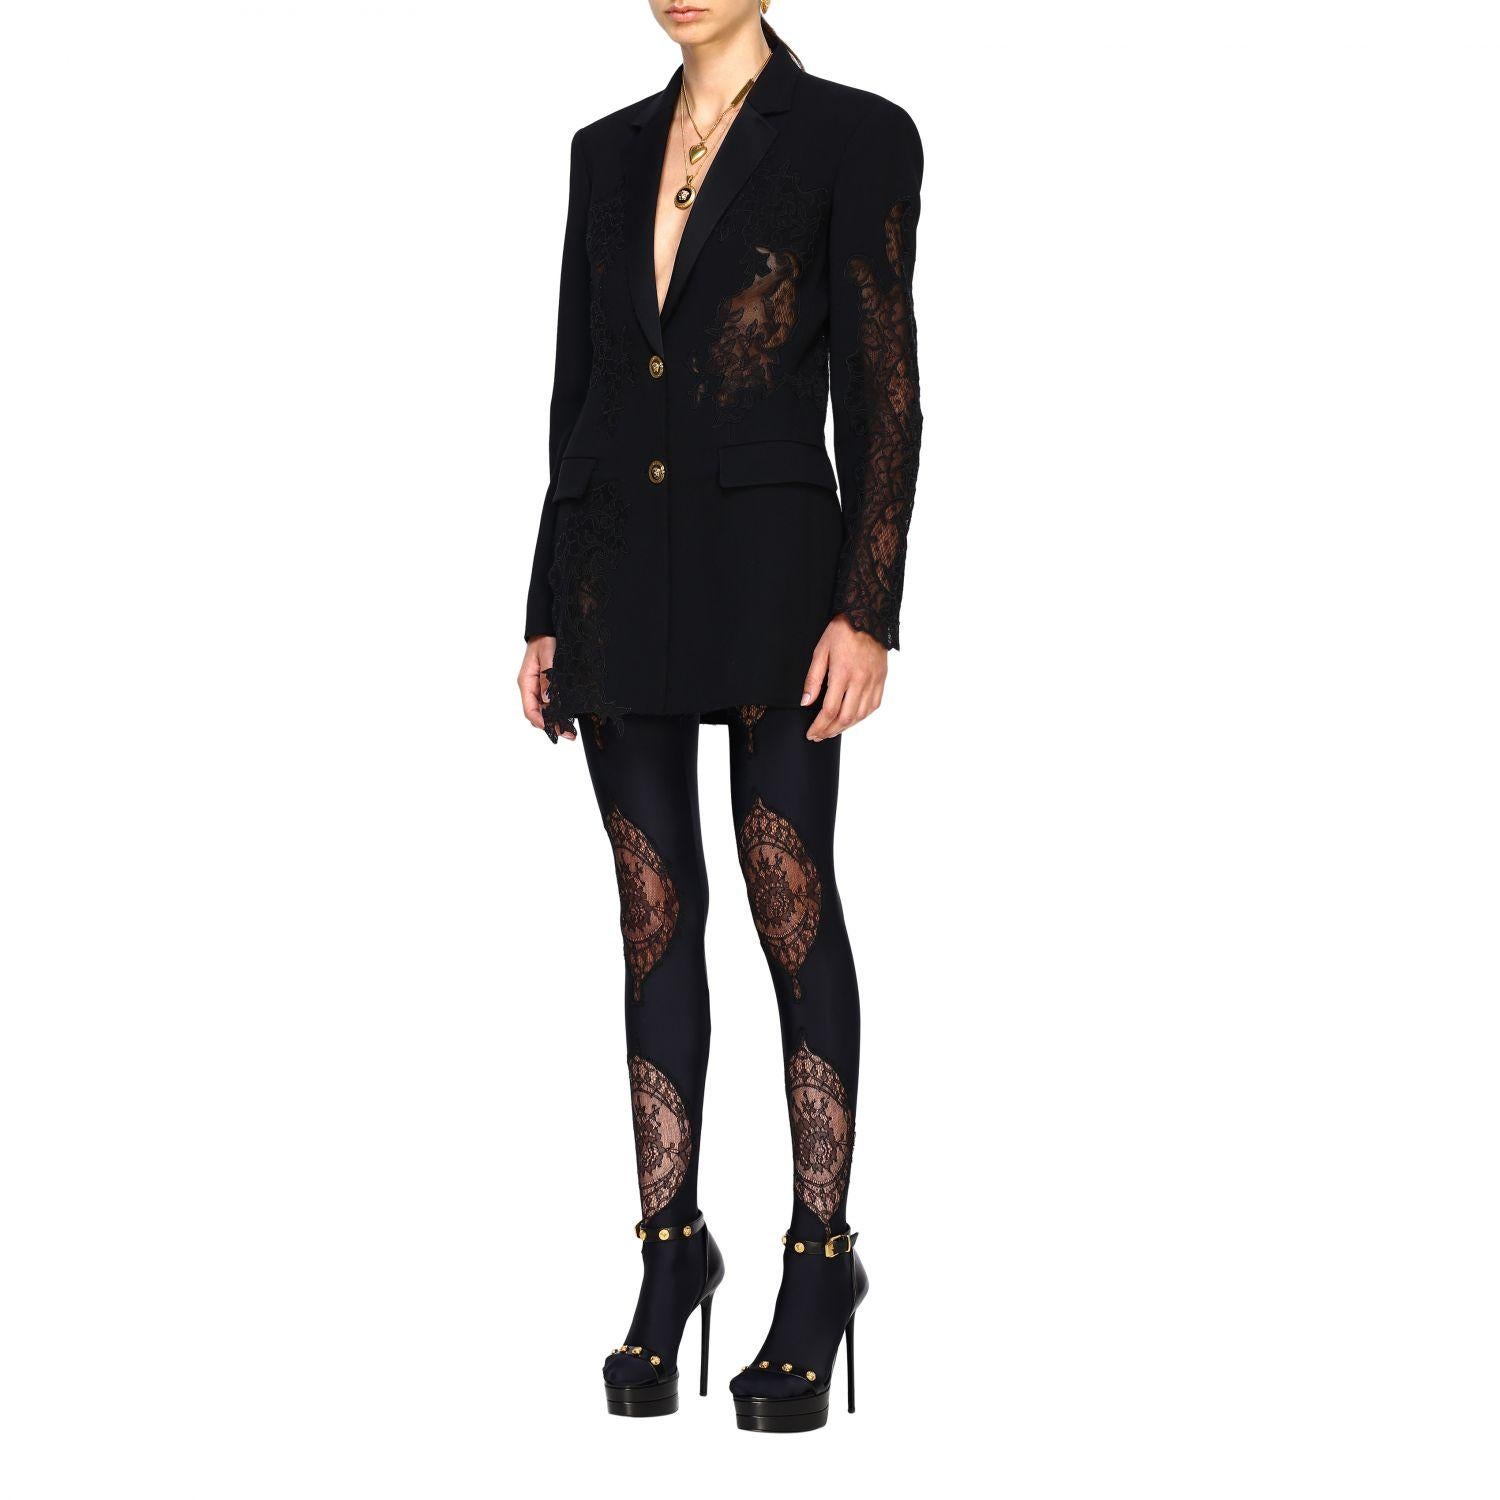 Versace Fall 2019 Runway Black Lace Panelled Jersey Leggings / Tights Size 1 3